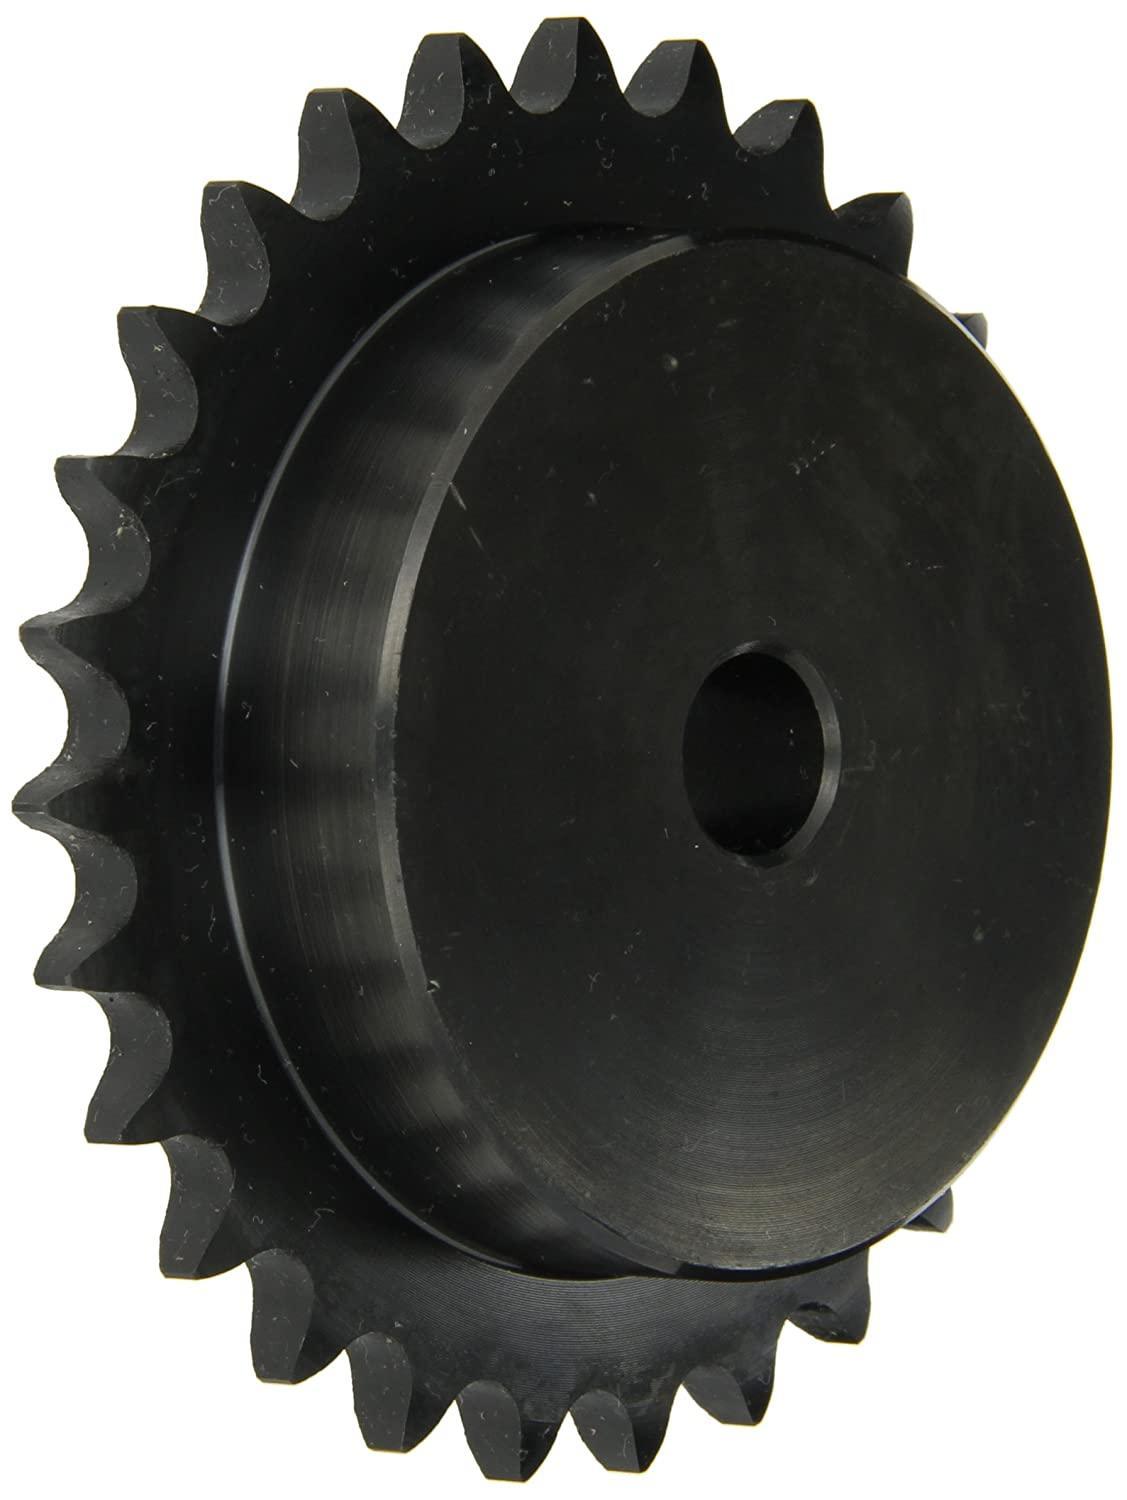 100B32 Roller Chain Sprocket With Stock Bore - Forces Inc